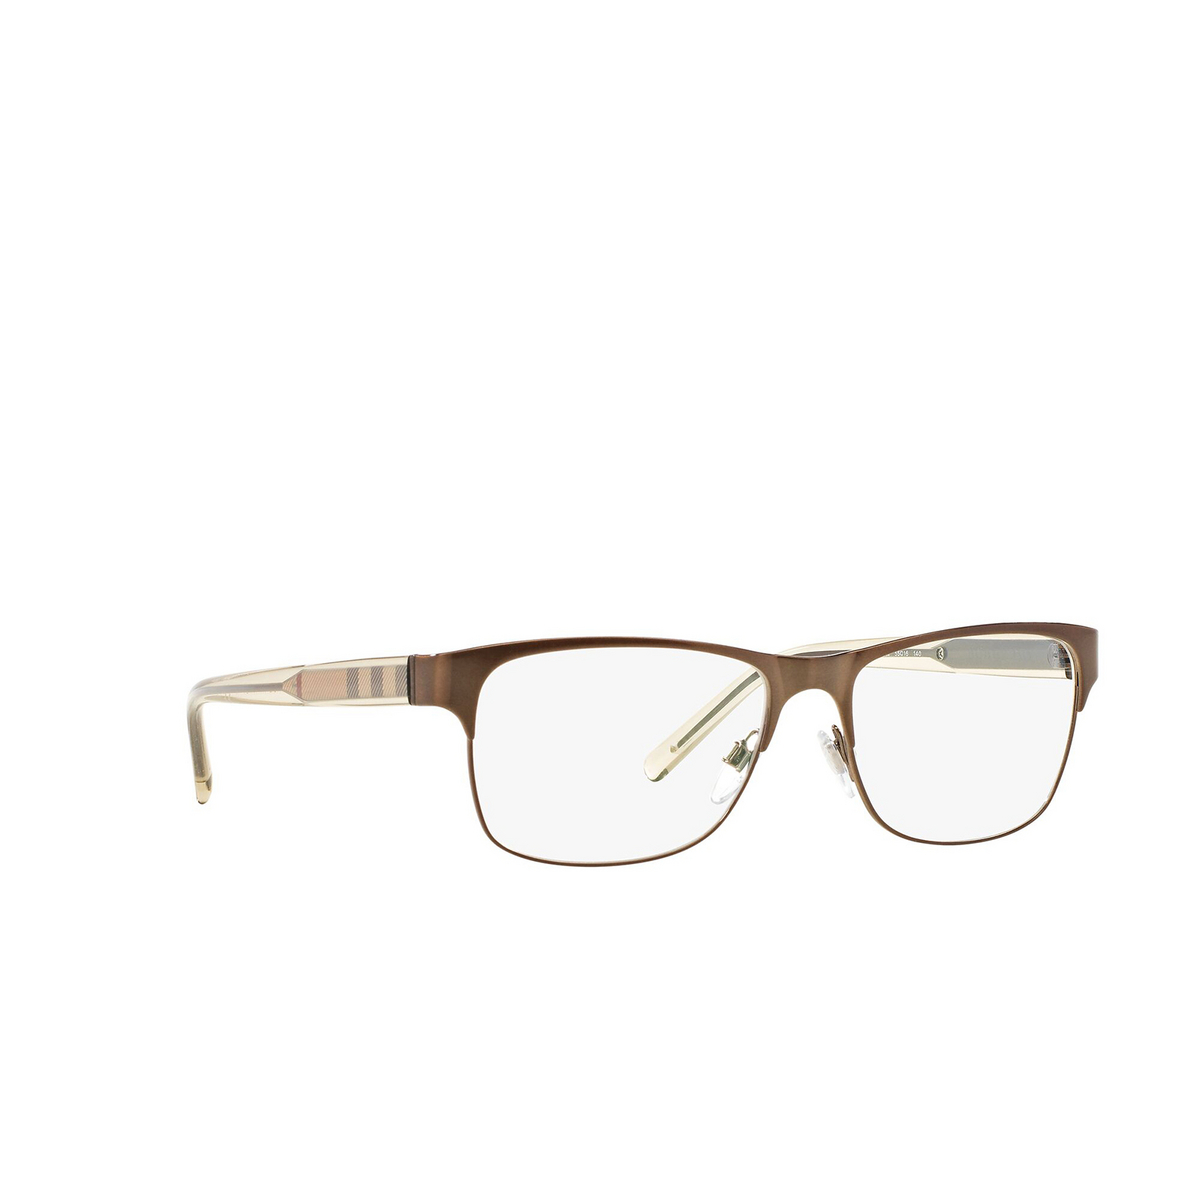 Burberry® Rectangle Eyeglasses: BE1289 color Brushed Brown 1212 - three-quarters view.